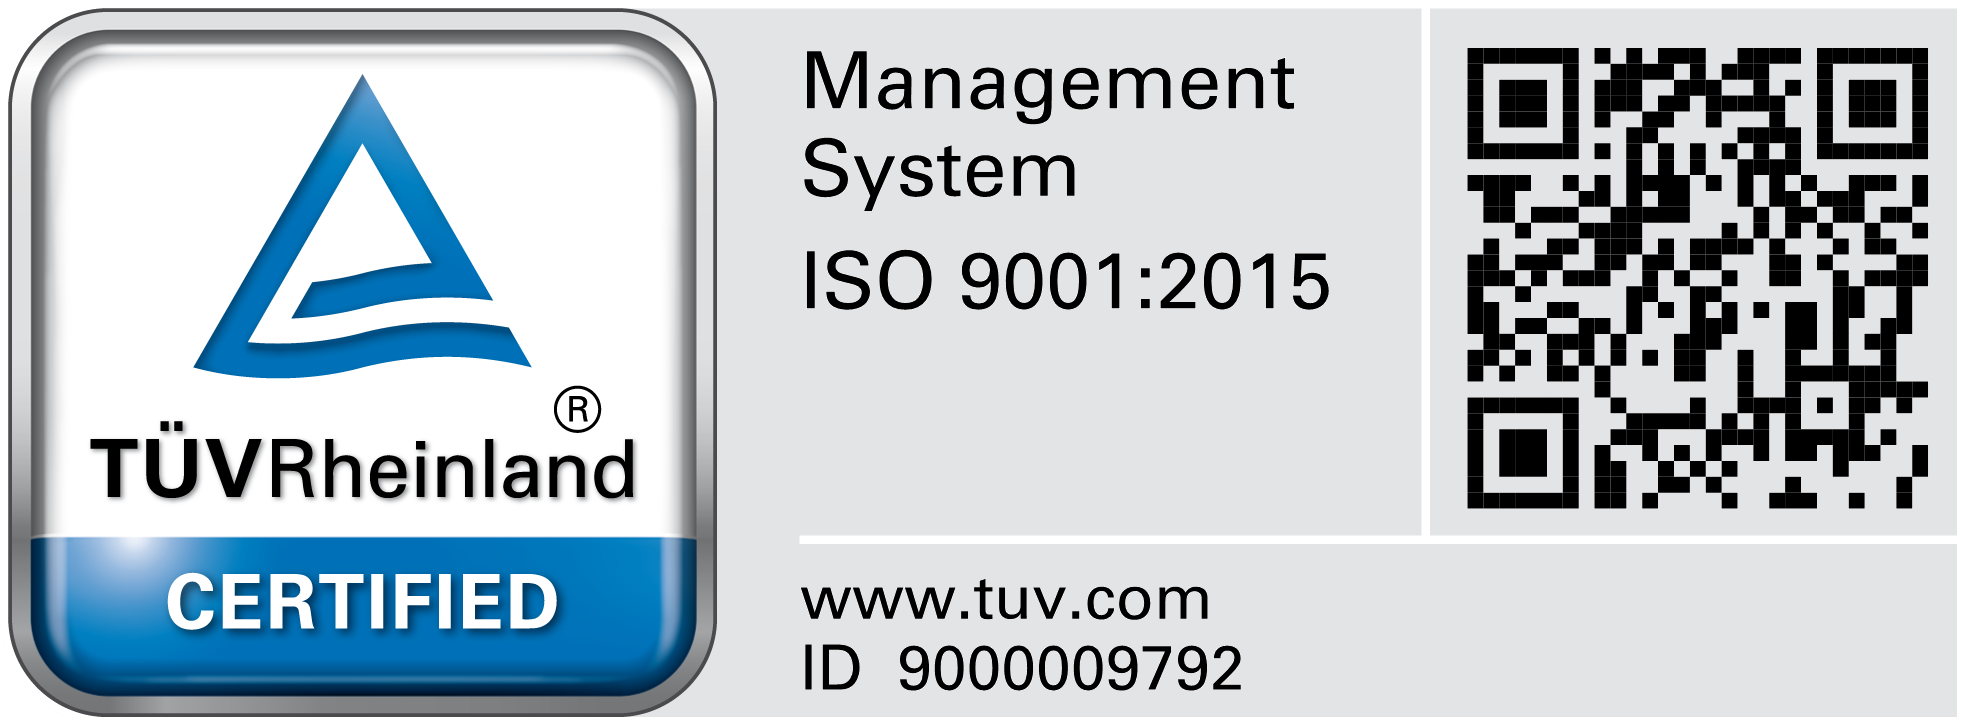 SYSTEM MANAGEMENT – ISO 9001:2015